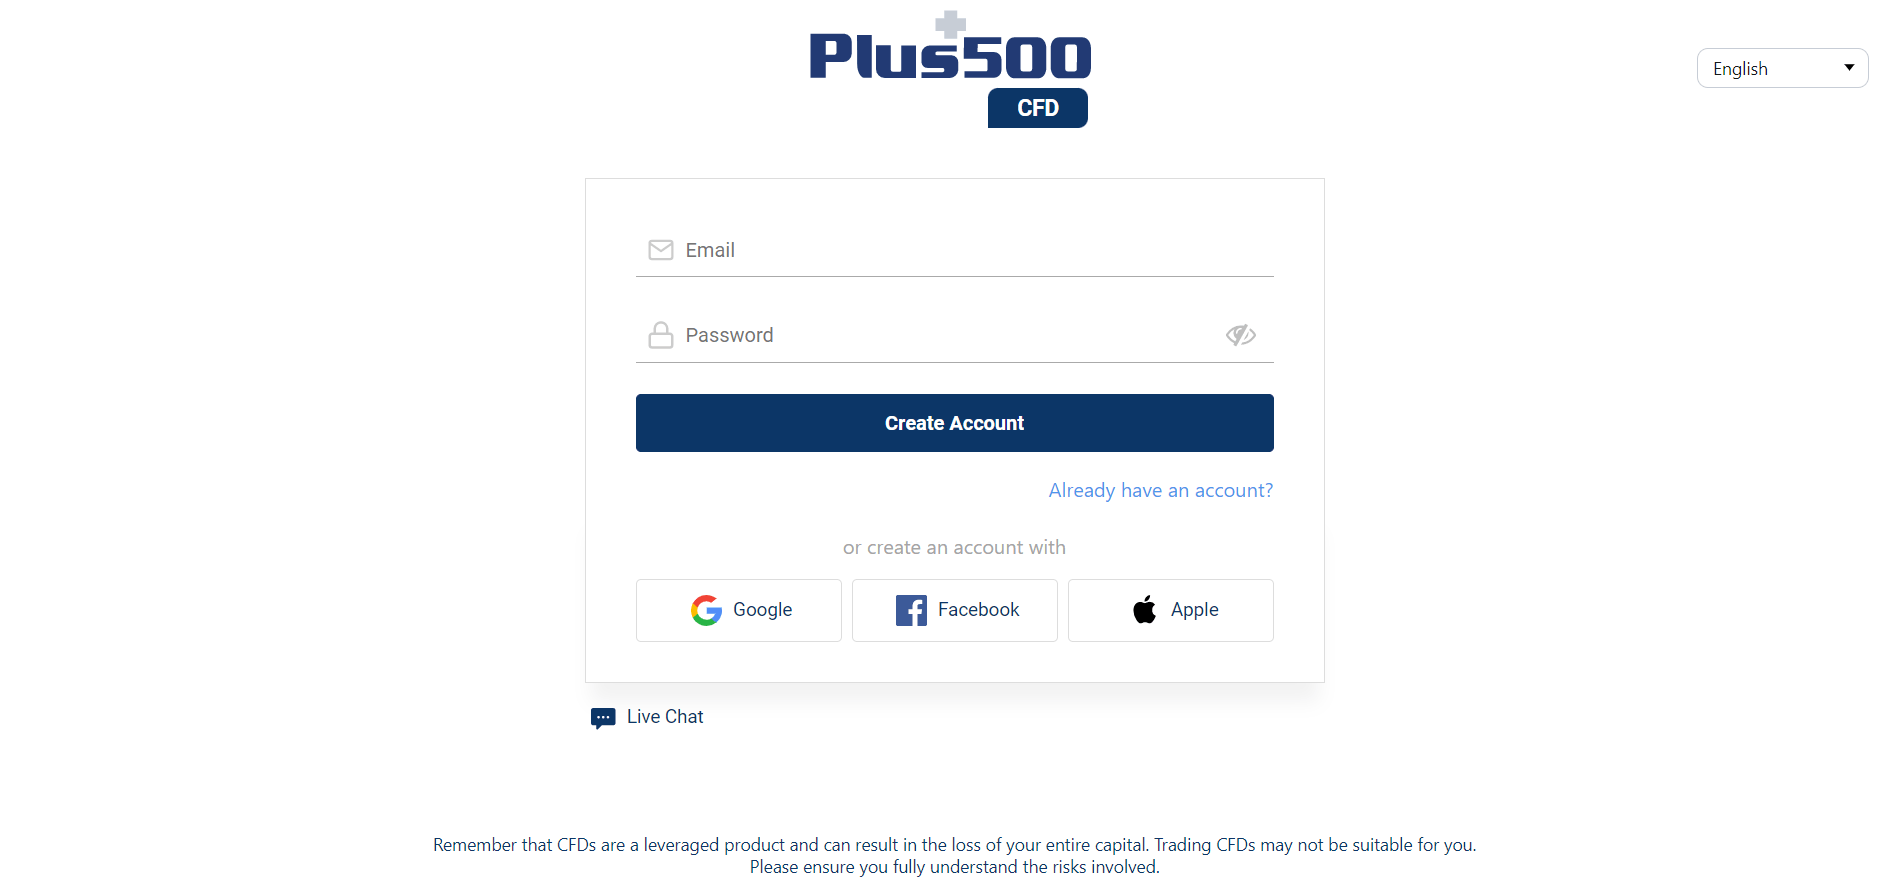 Creating a Plus500 account